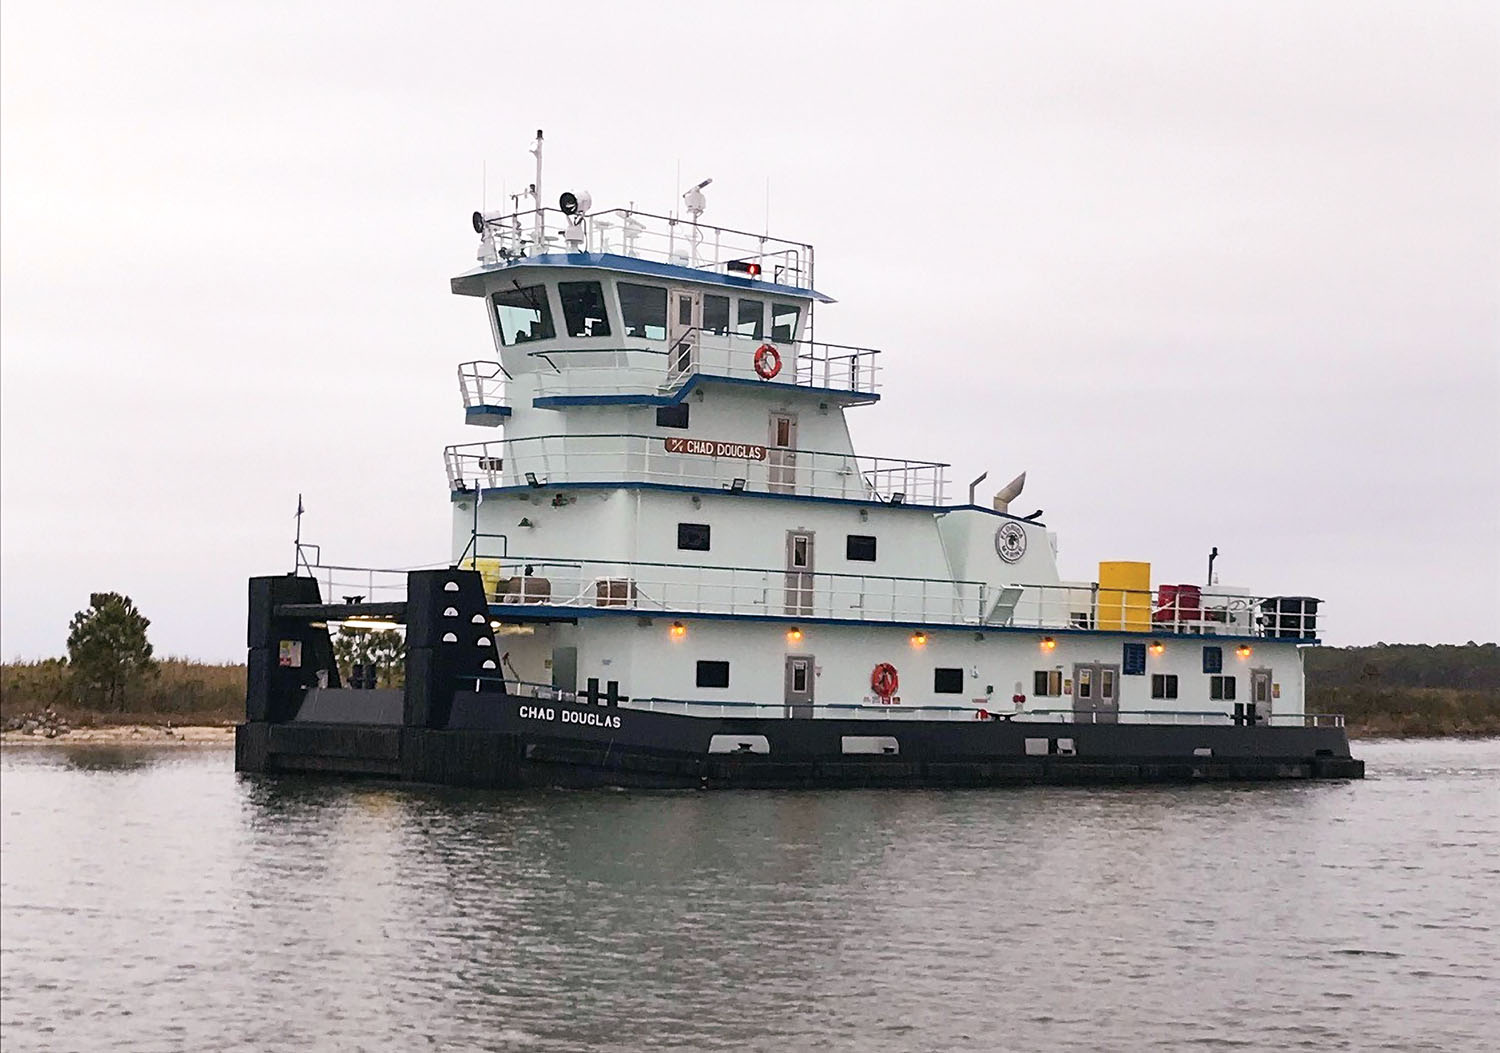 chad douglas towboat on the water